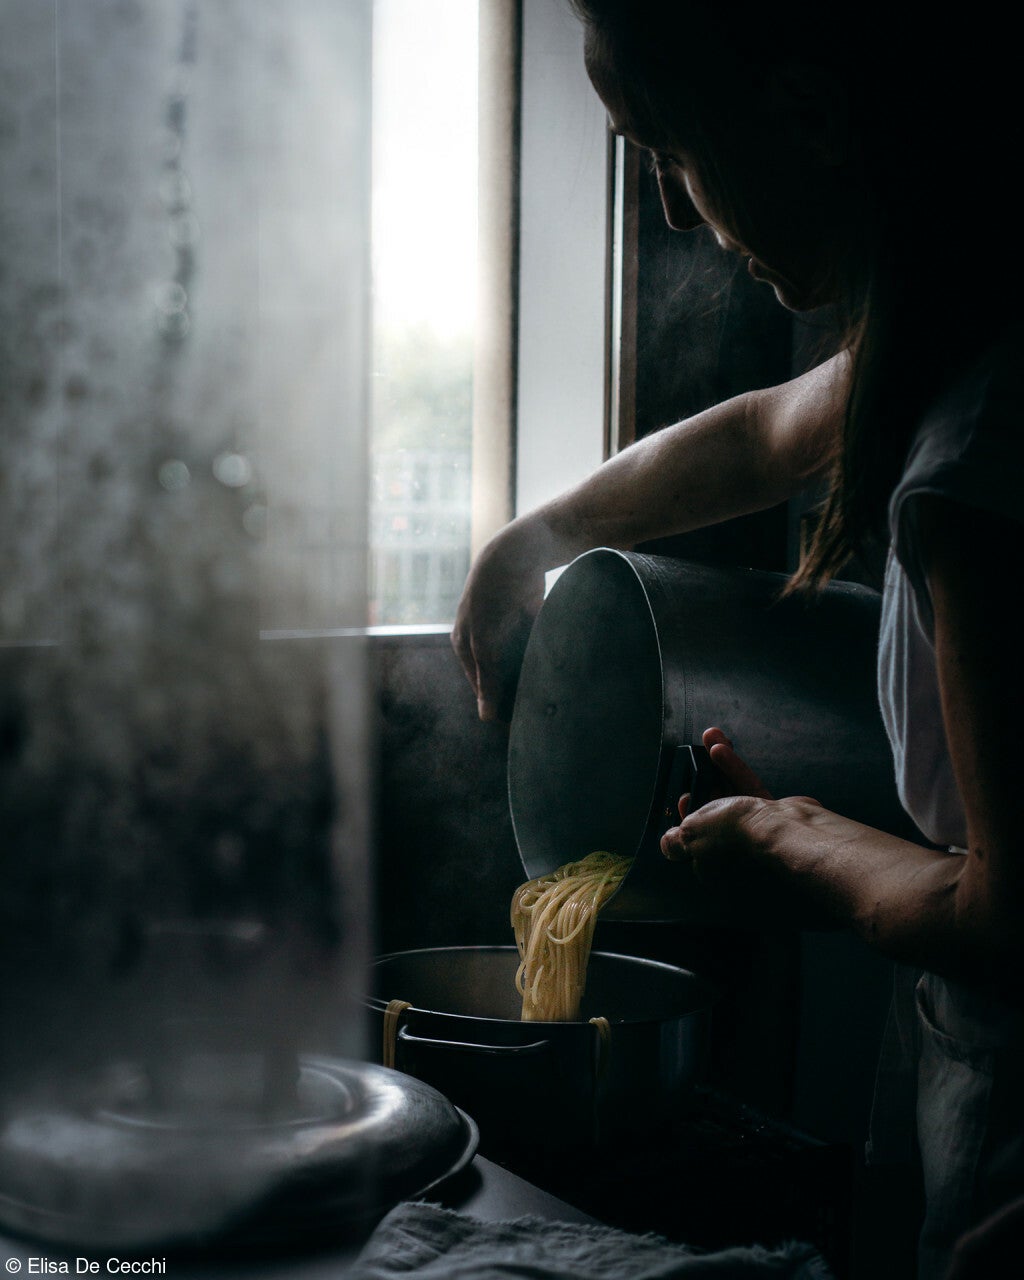 a person drains pasta by the kitchen window on a gloomy and cloudy day